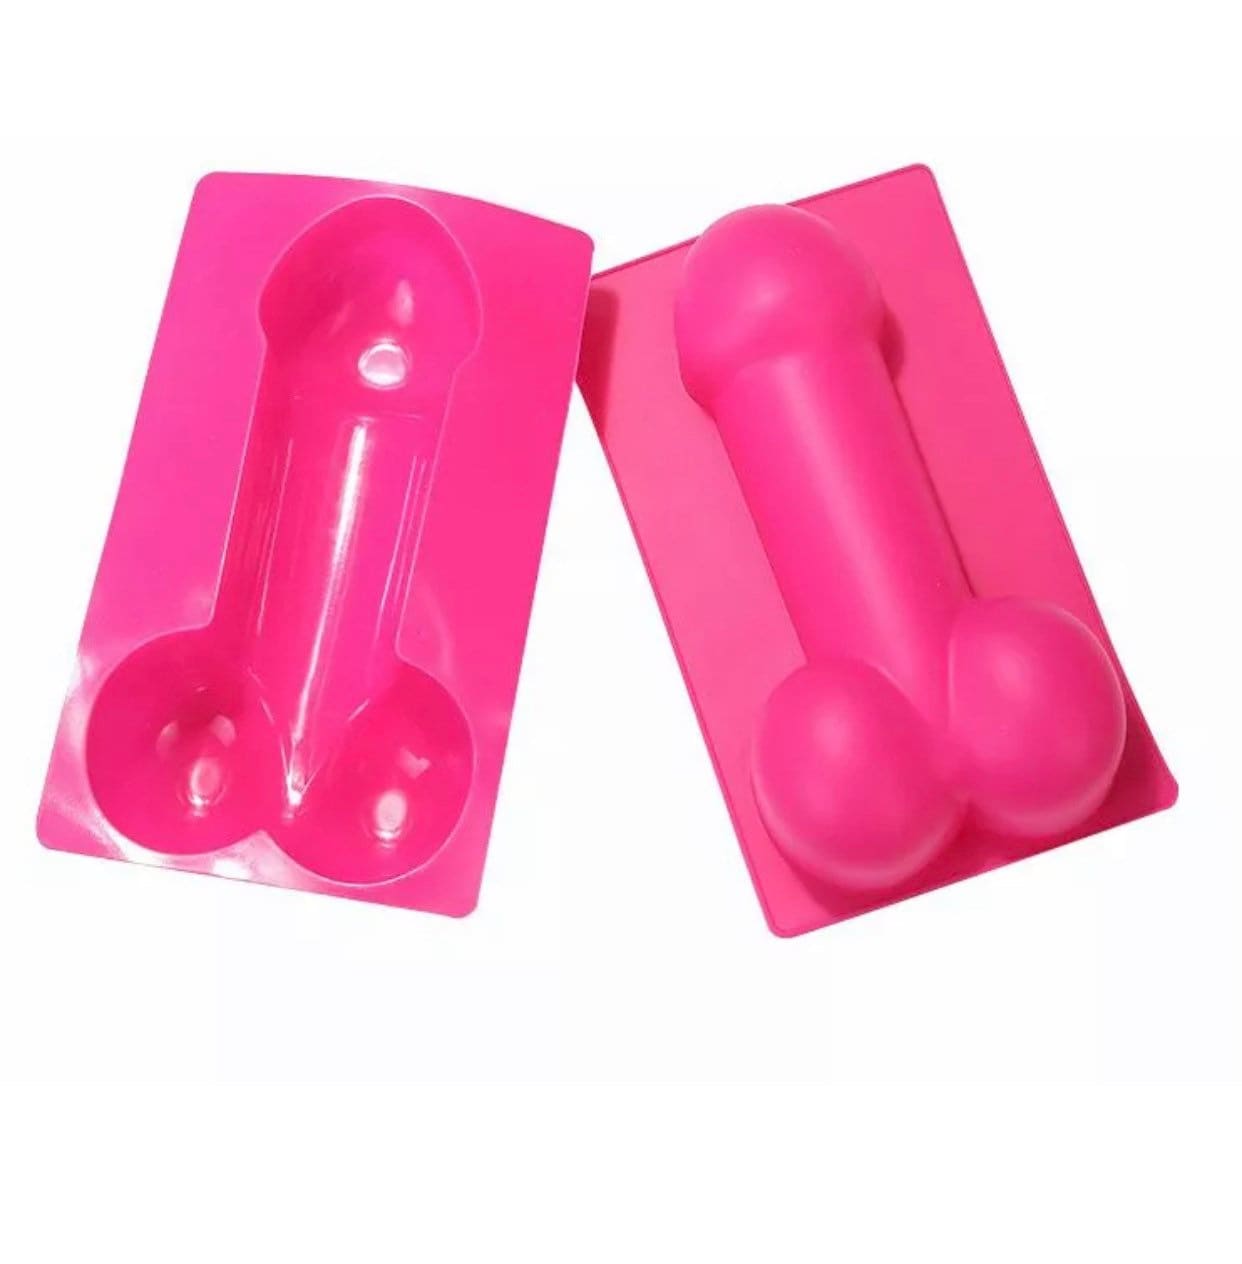 Penis Mold, Dick Mold, Silicone Penis Mold Ice Cube Tray, Candle Mold,  Penis Chocolate Mold, Penis Jello Mold, Dick Jello Mold, Non Stick